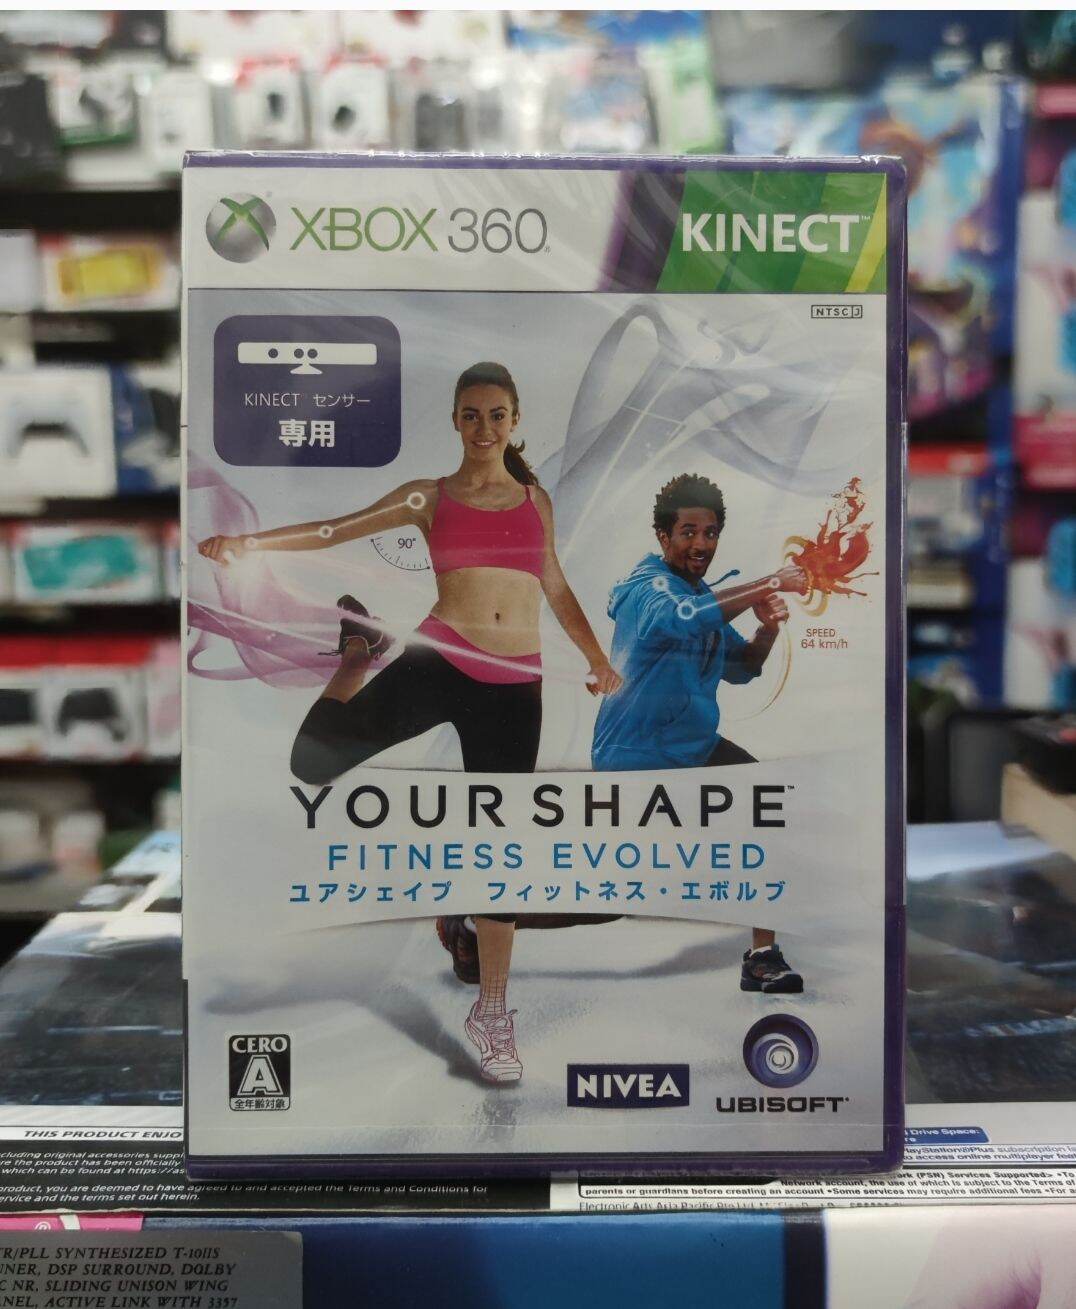 Your Shape: Fitness Evolved (Xbox 360) Game Profile 